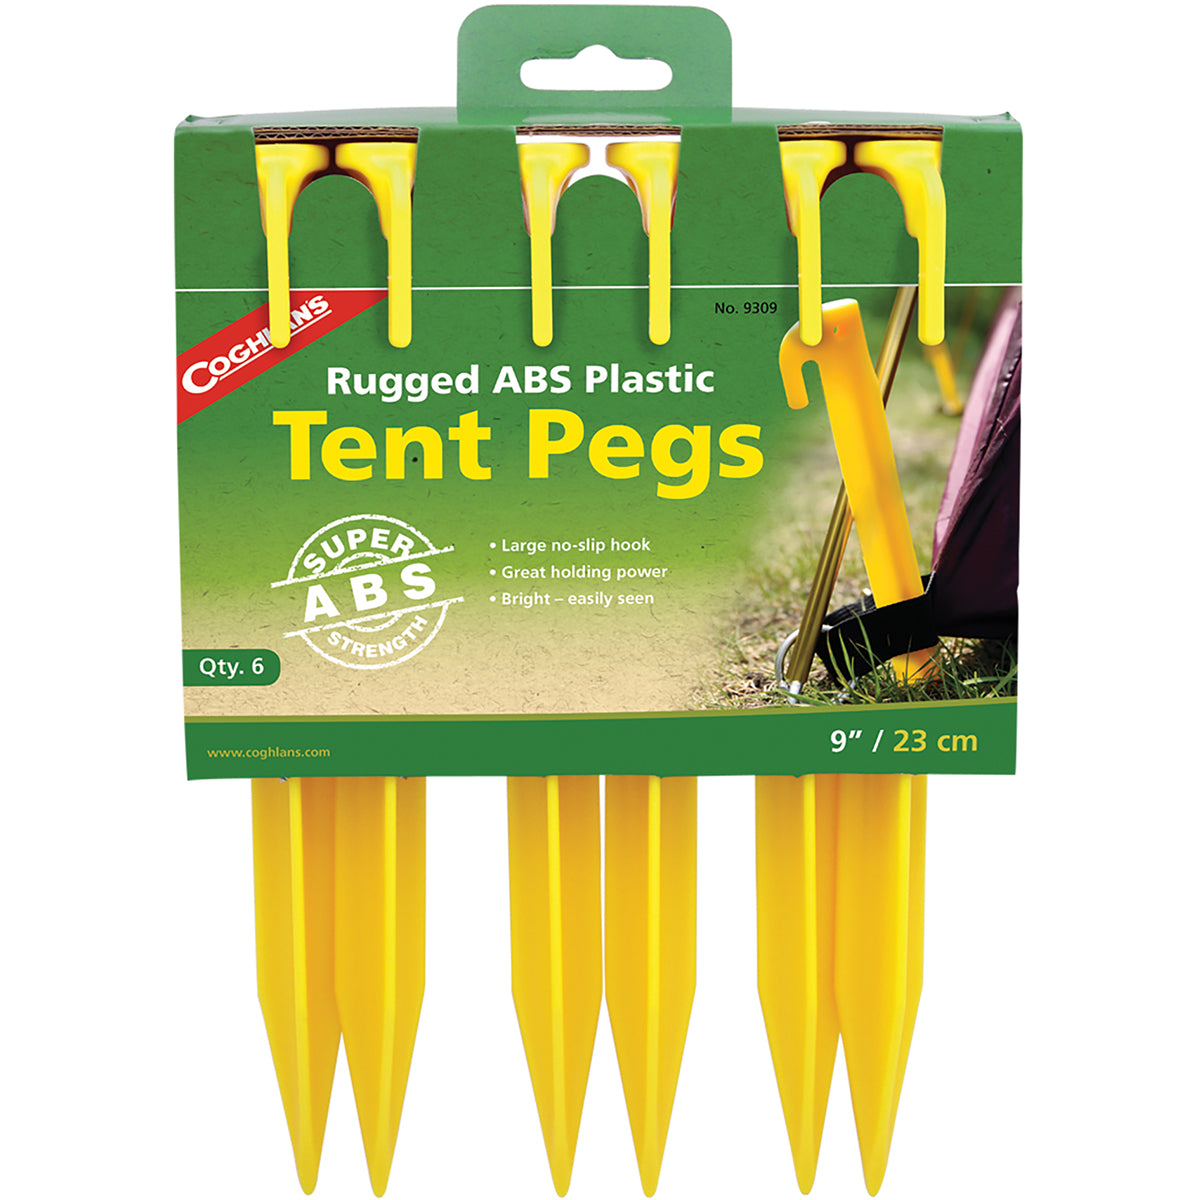 Coghlan's Rugged ABS Plastic 9" Tent Pegs (6 Pack), Survival Camping Stakes Coghlan's